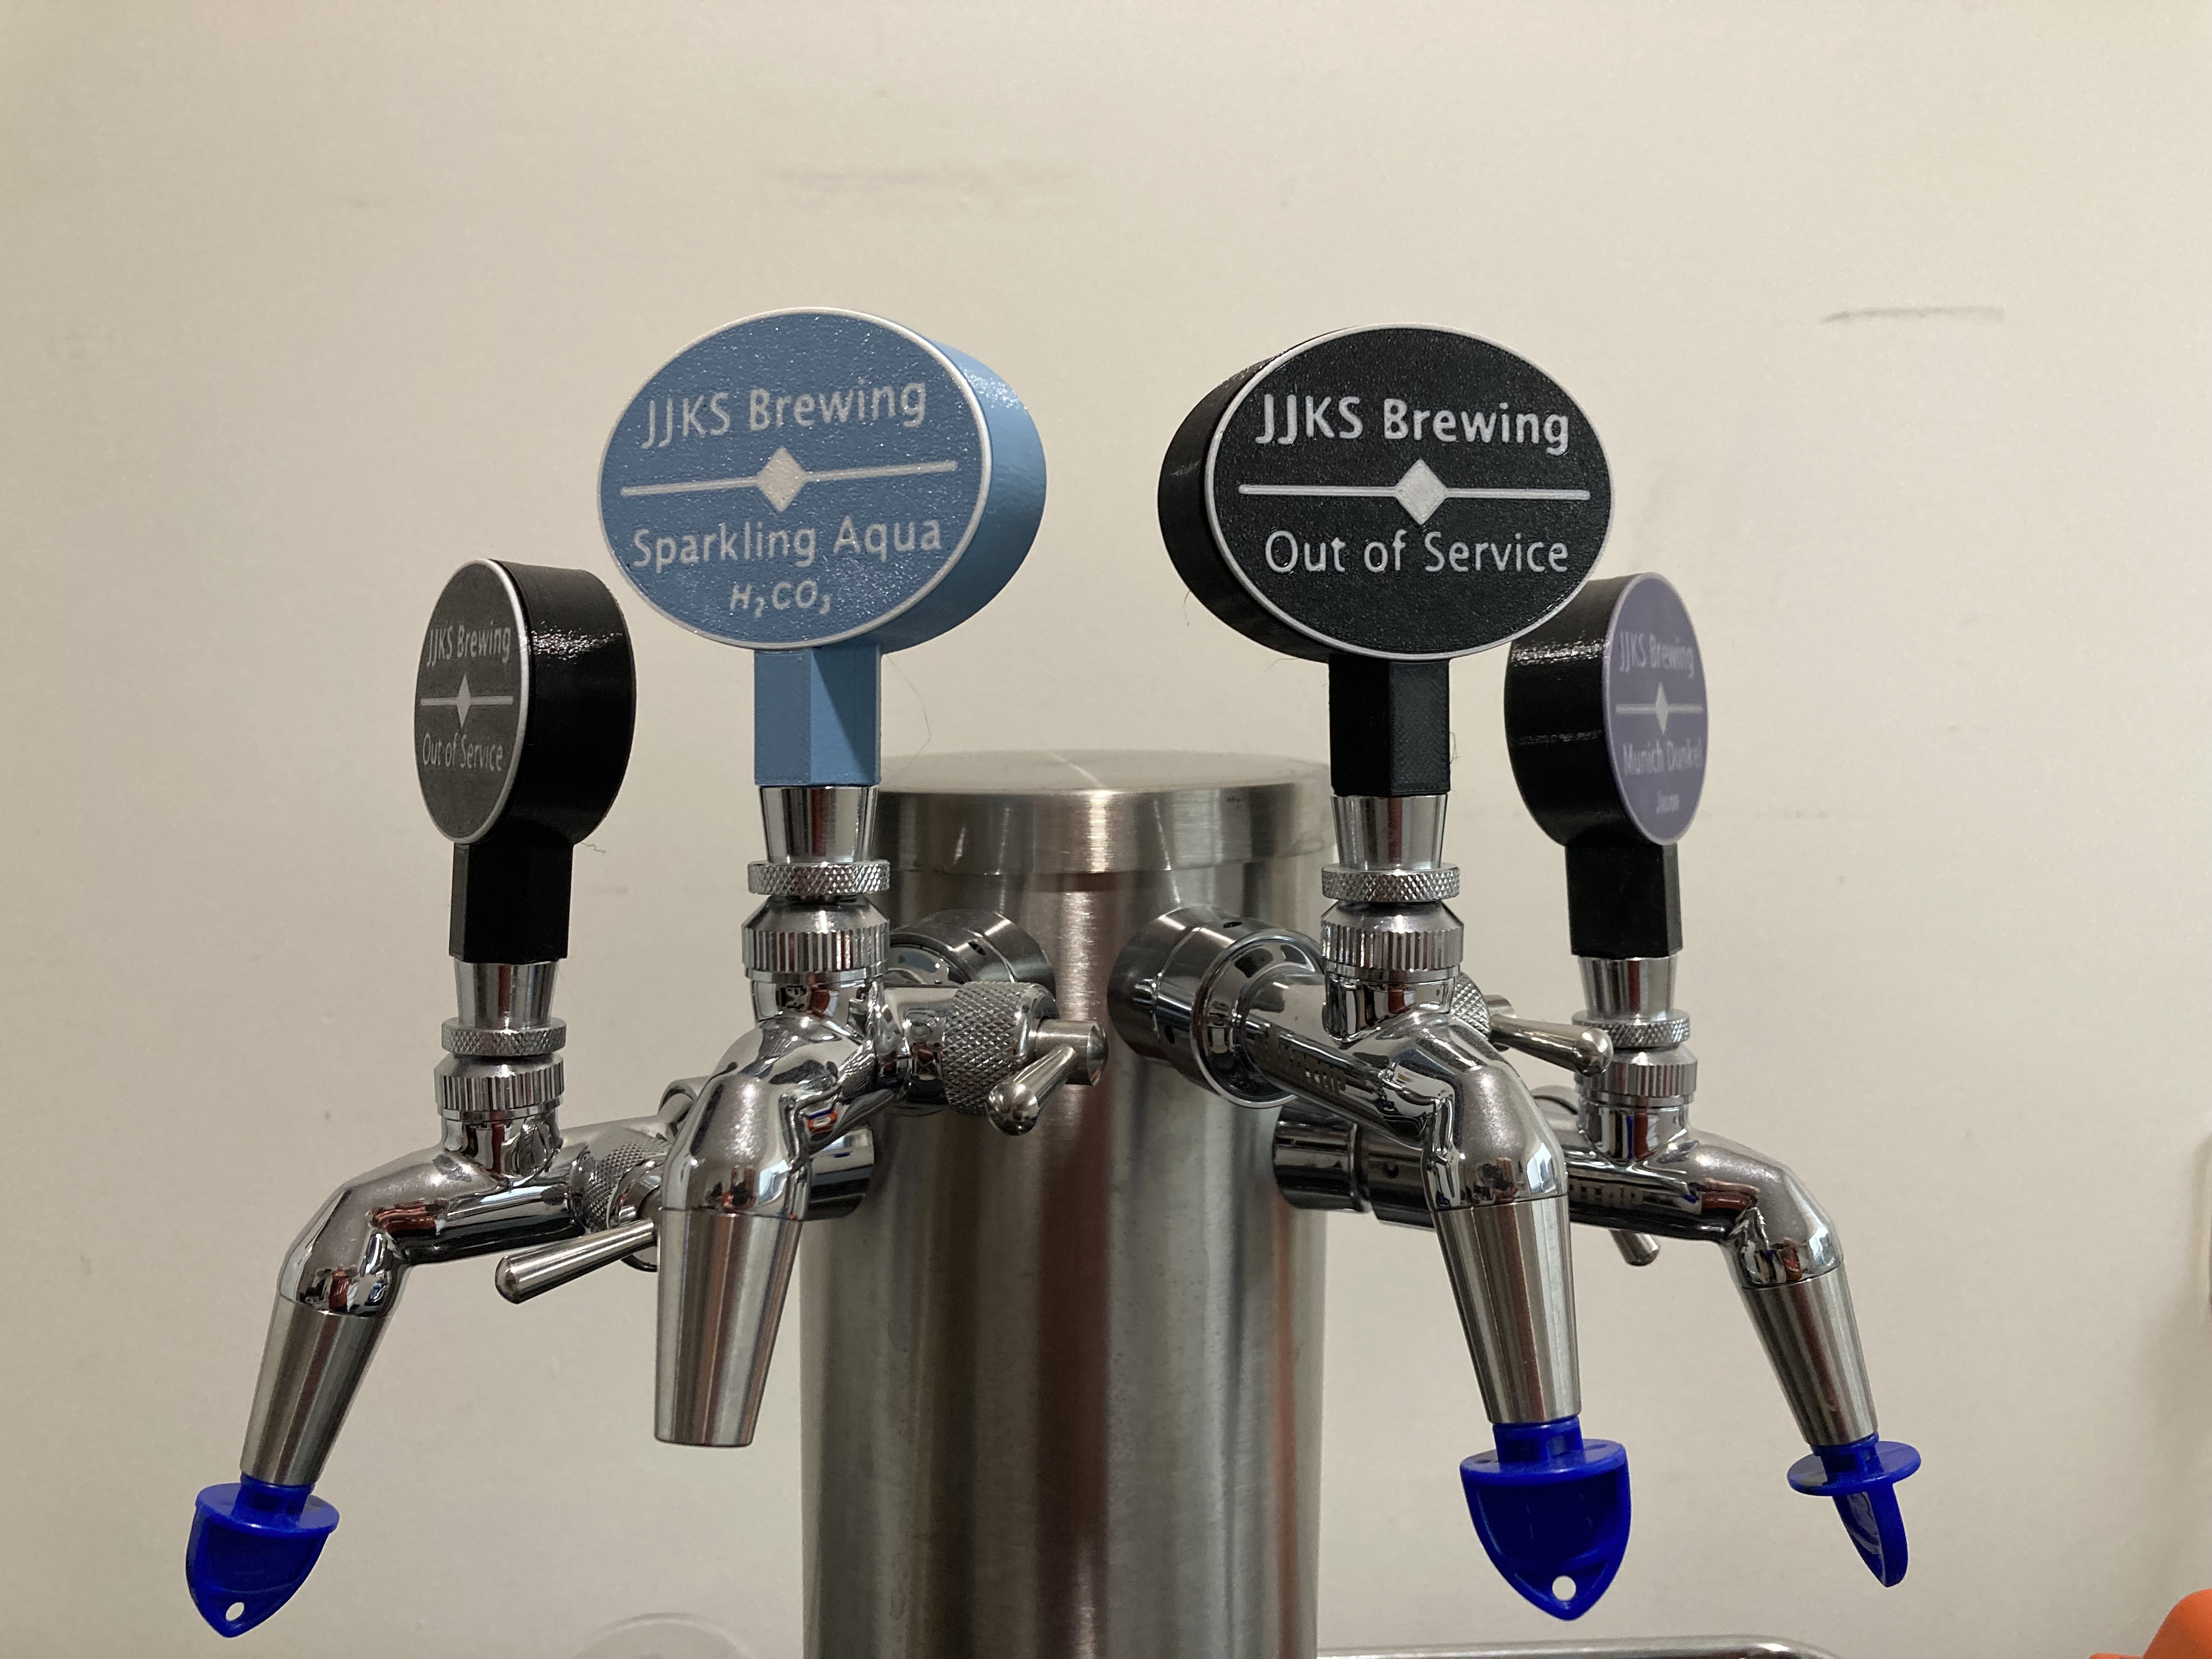 Modular beer taps - snap in magnetic faces